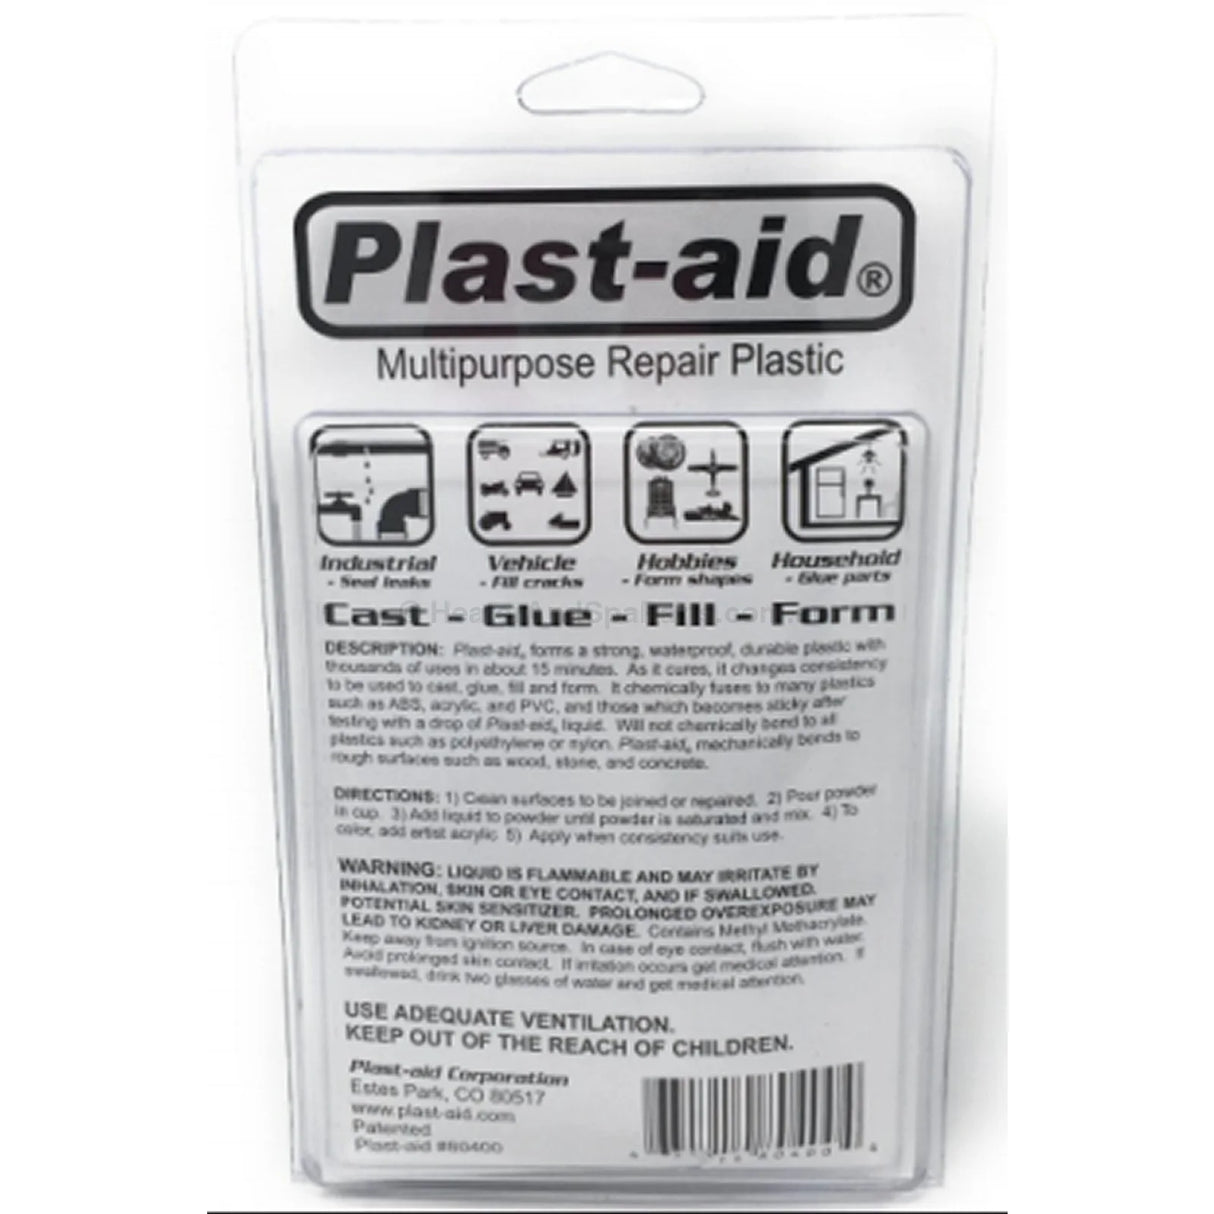 Plast-Aid Plastic Repair Kit for PVC, Acrylic, ABS, Polycarbonate, Fibreglass - Heater and Spa Parts